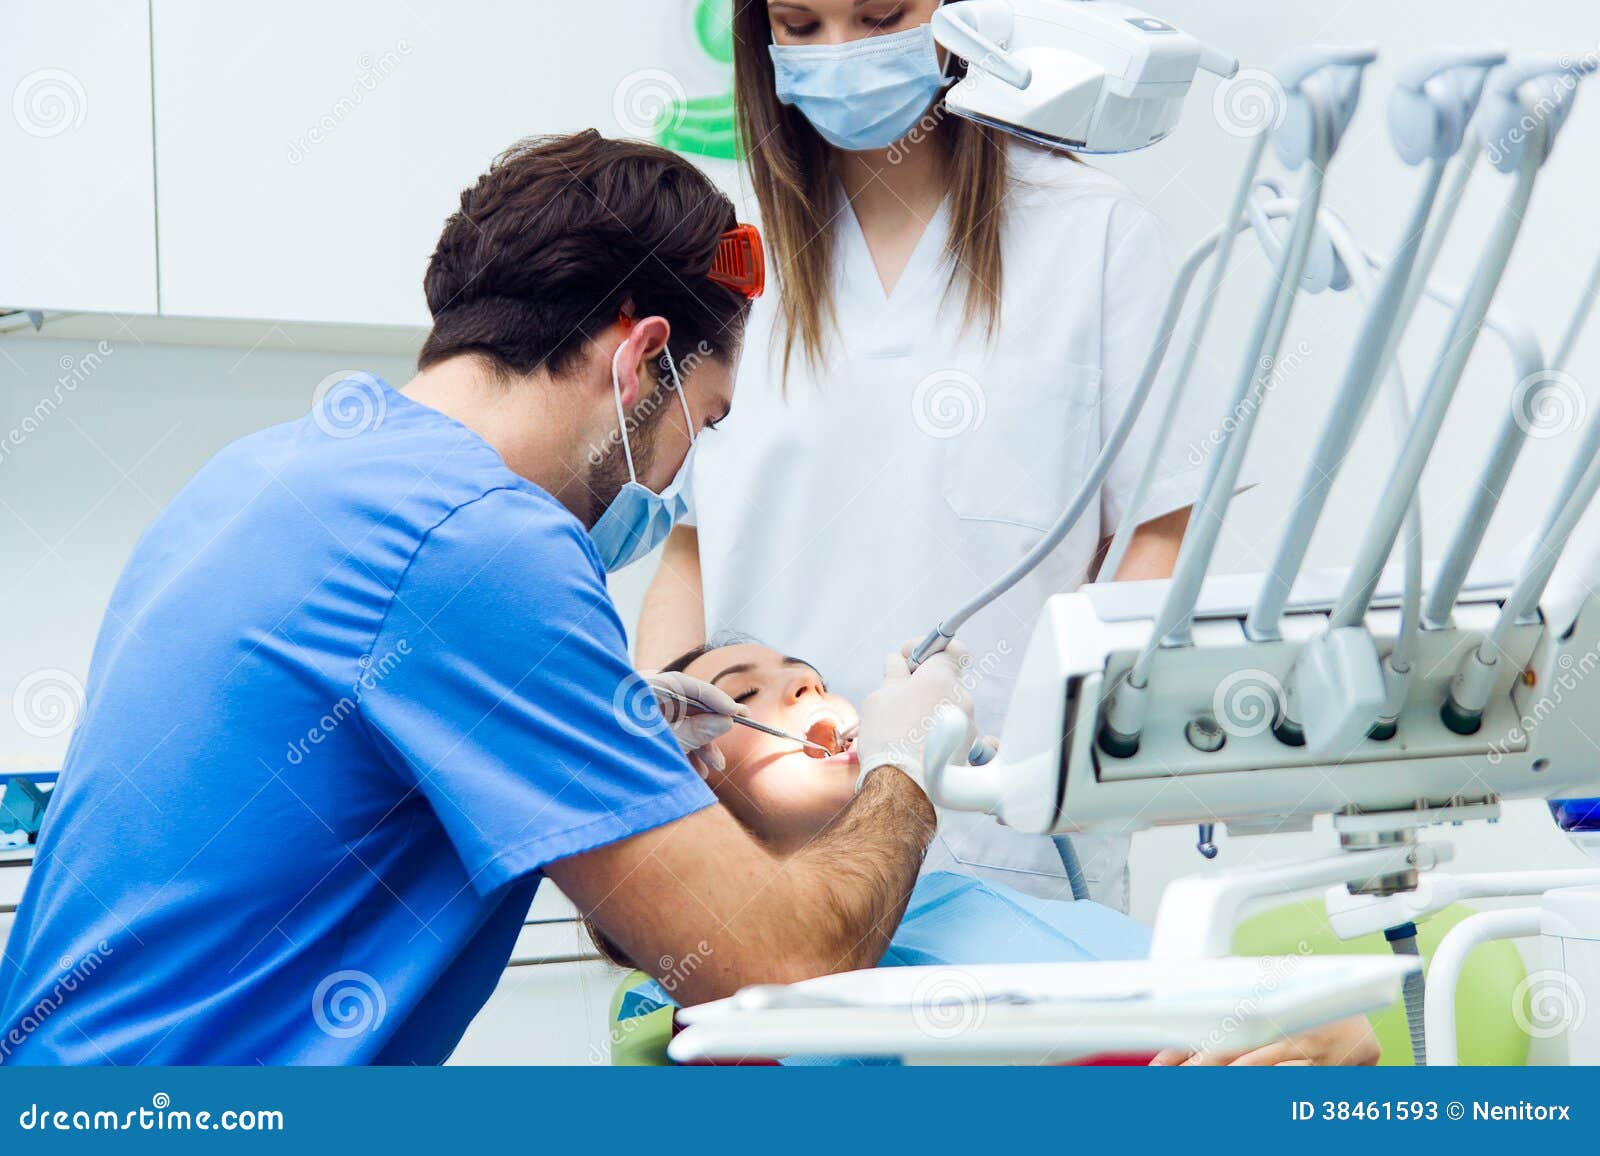 Cute Young Woman At The Dentist Mouth Checkup Stock Image Image Of